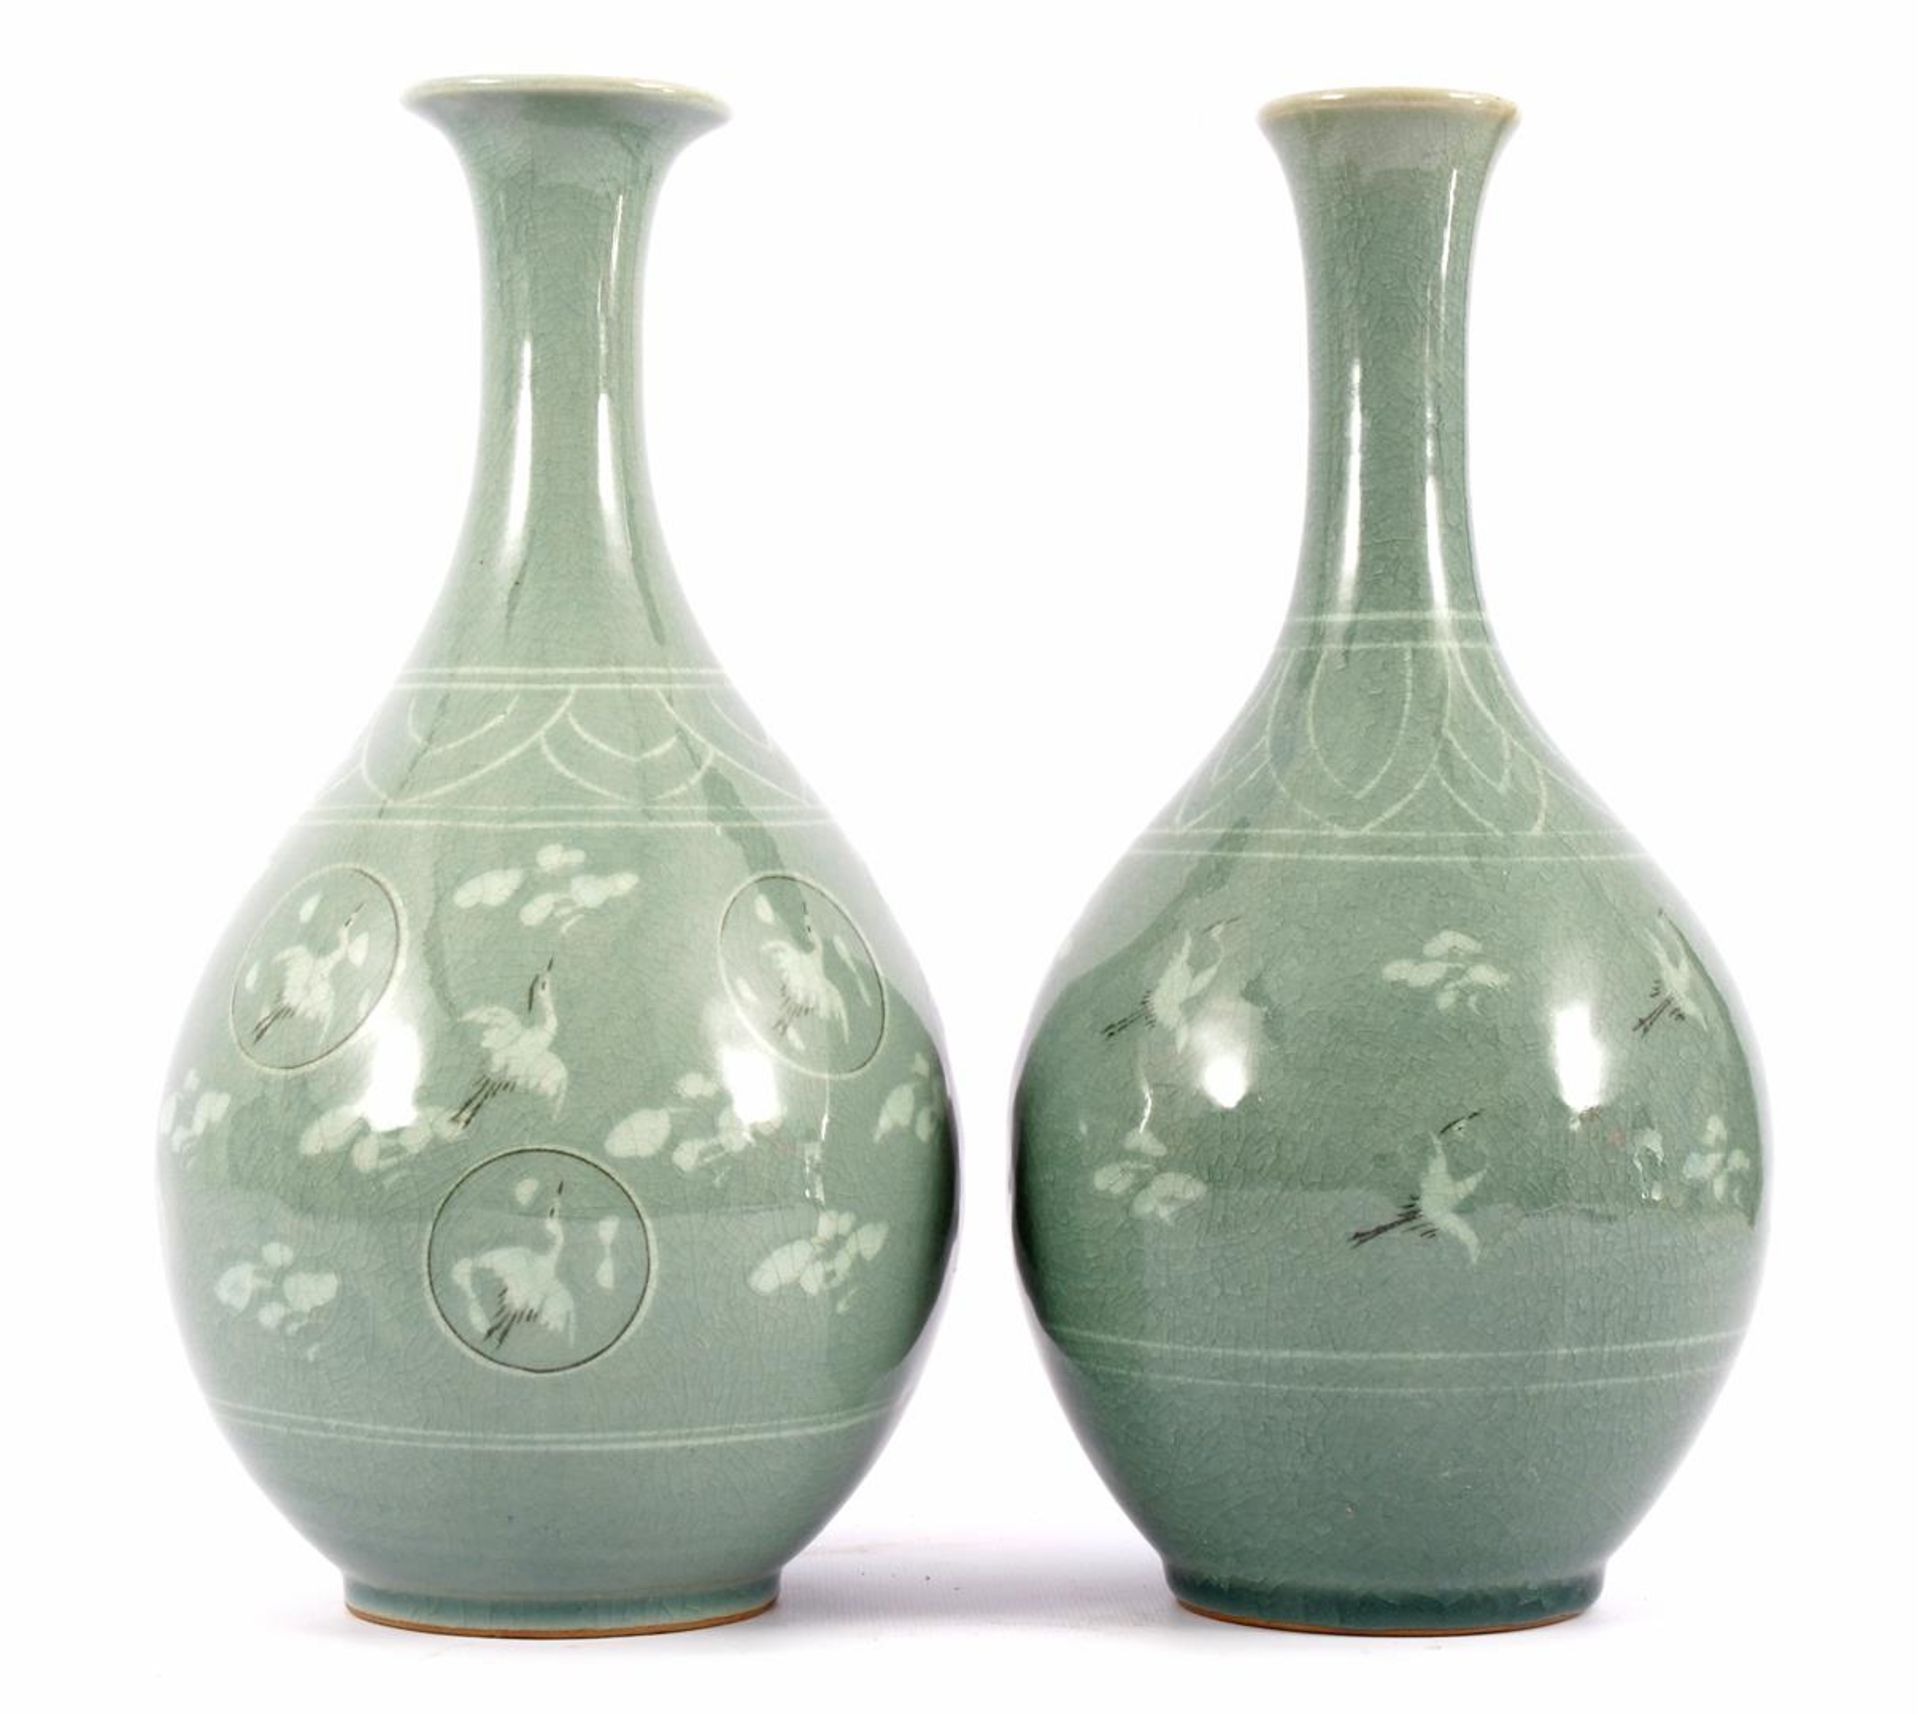 2 Japanese porcelain green glazed vases decorated with flying herons and clouds, 30.8 cm high